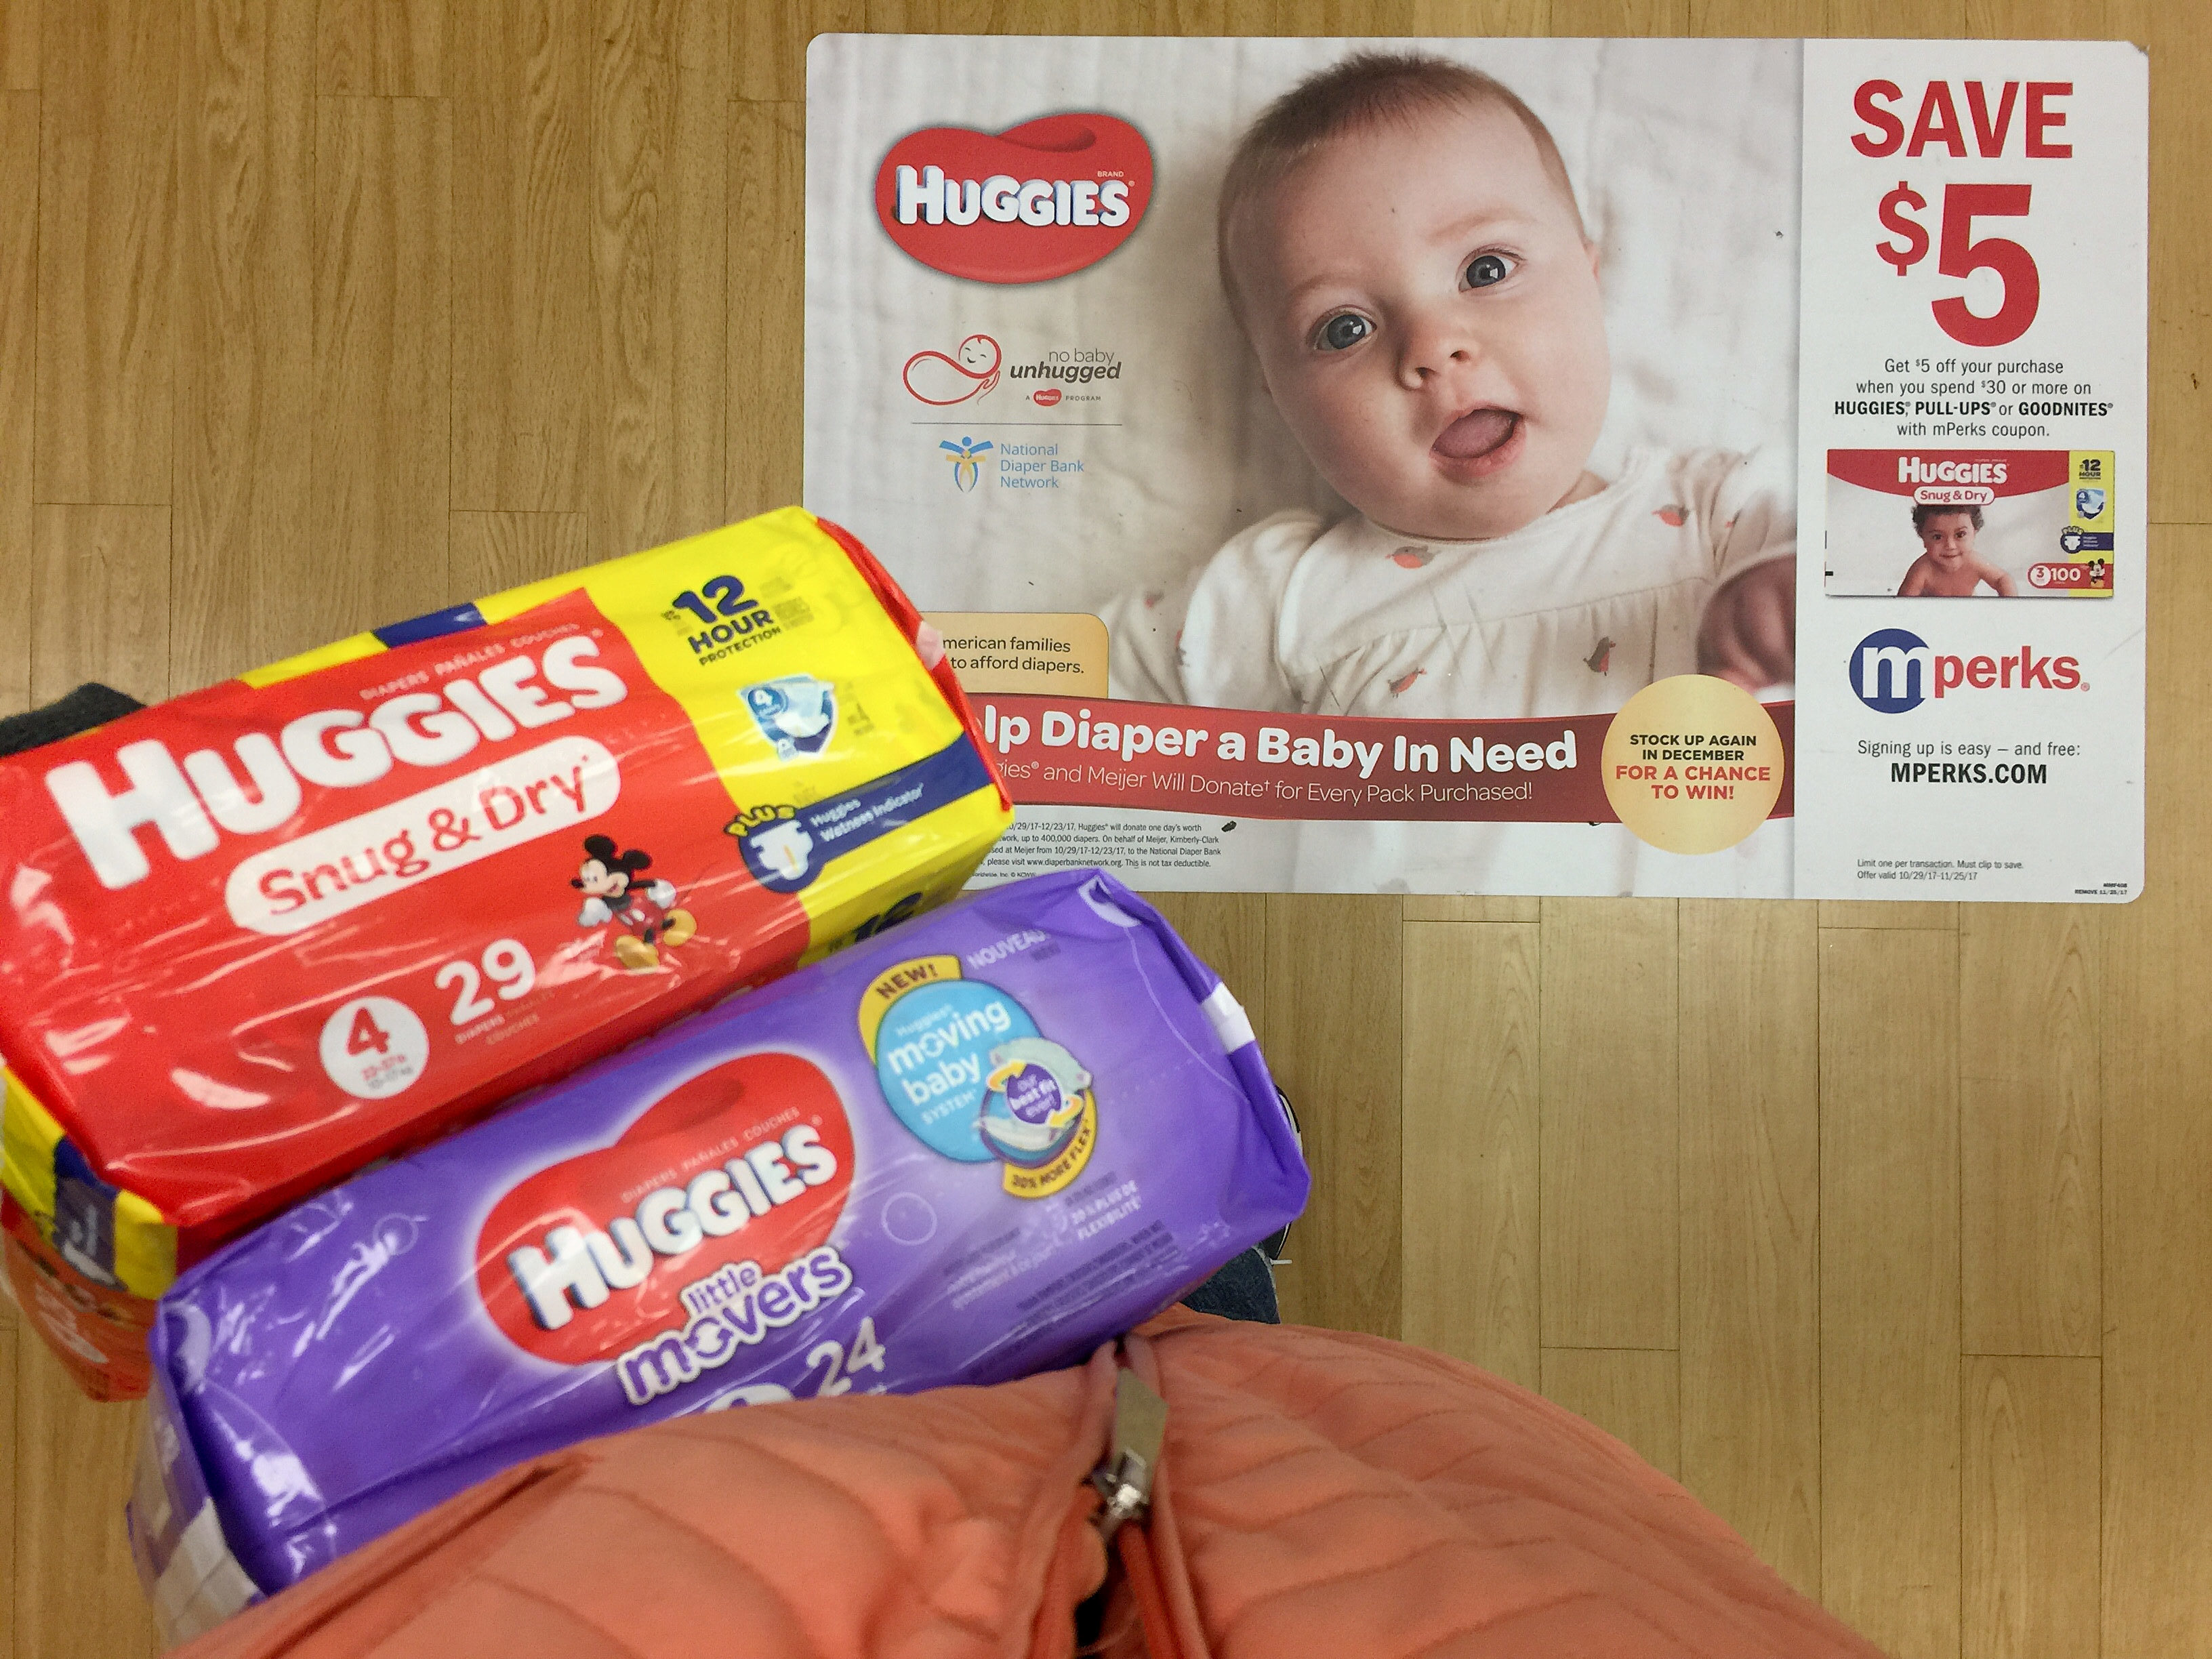 No Baby Unhugged At Meijer And WIN Diapers for a year! ©www.roastedbeanz.com [AD] #DiaperNeed #Hugs4Huggies